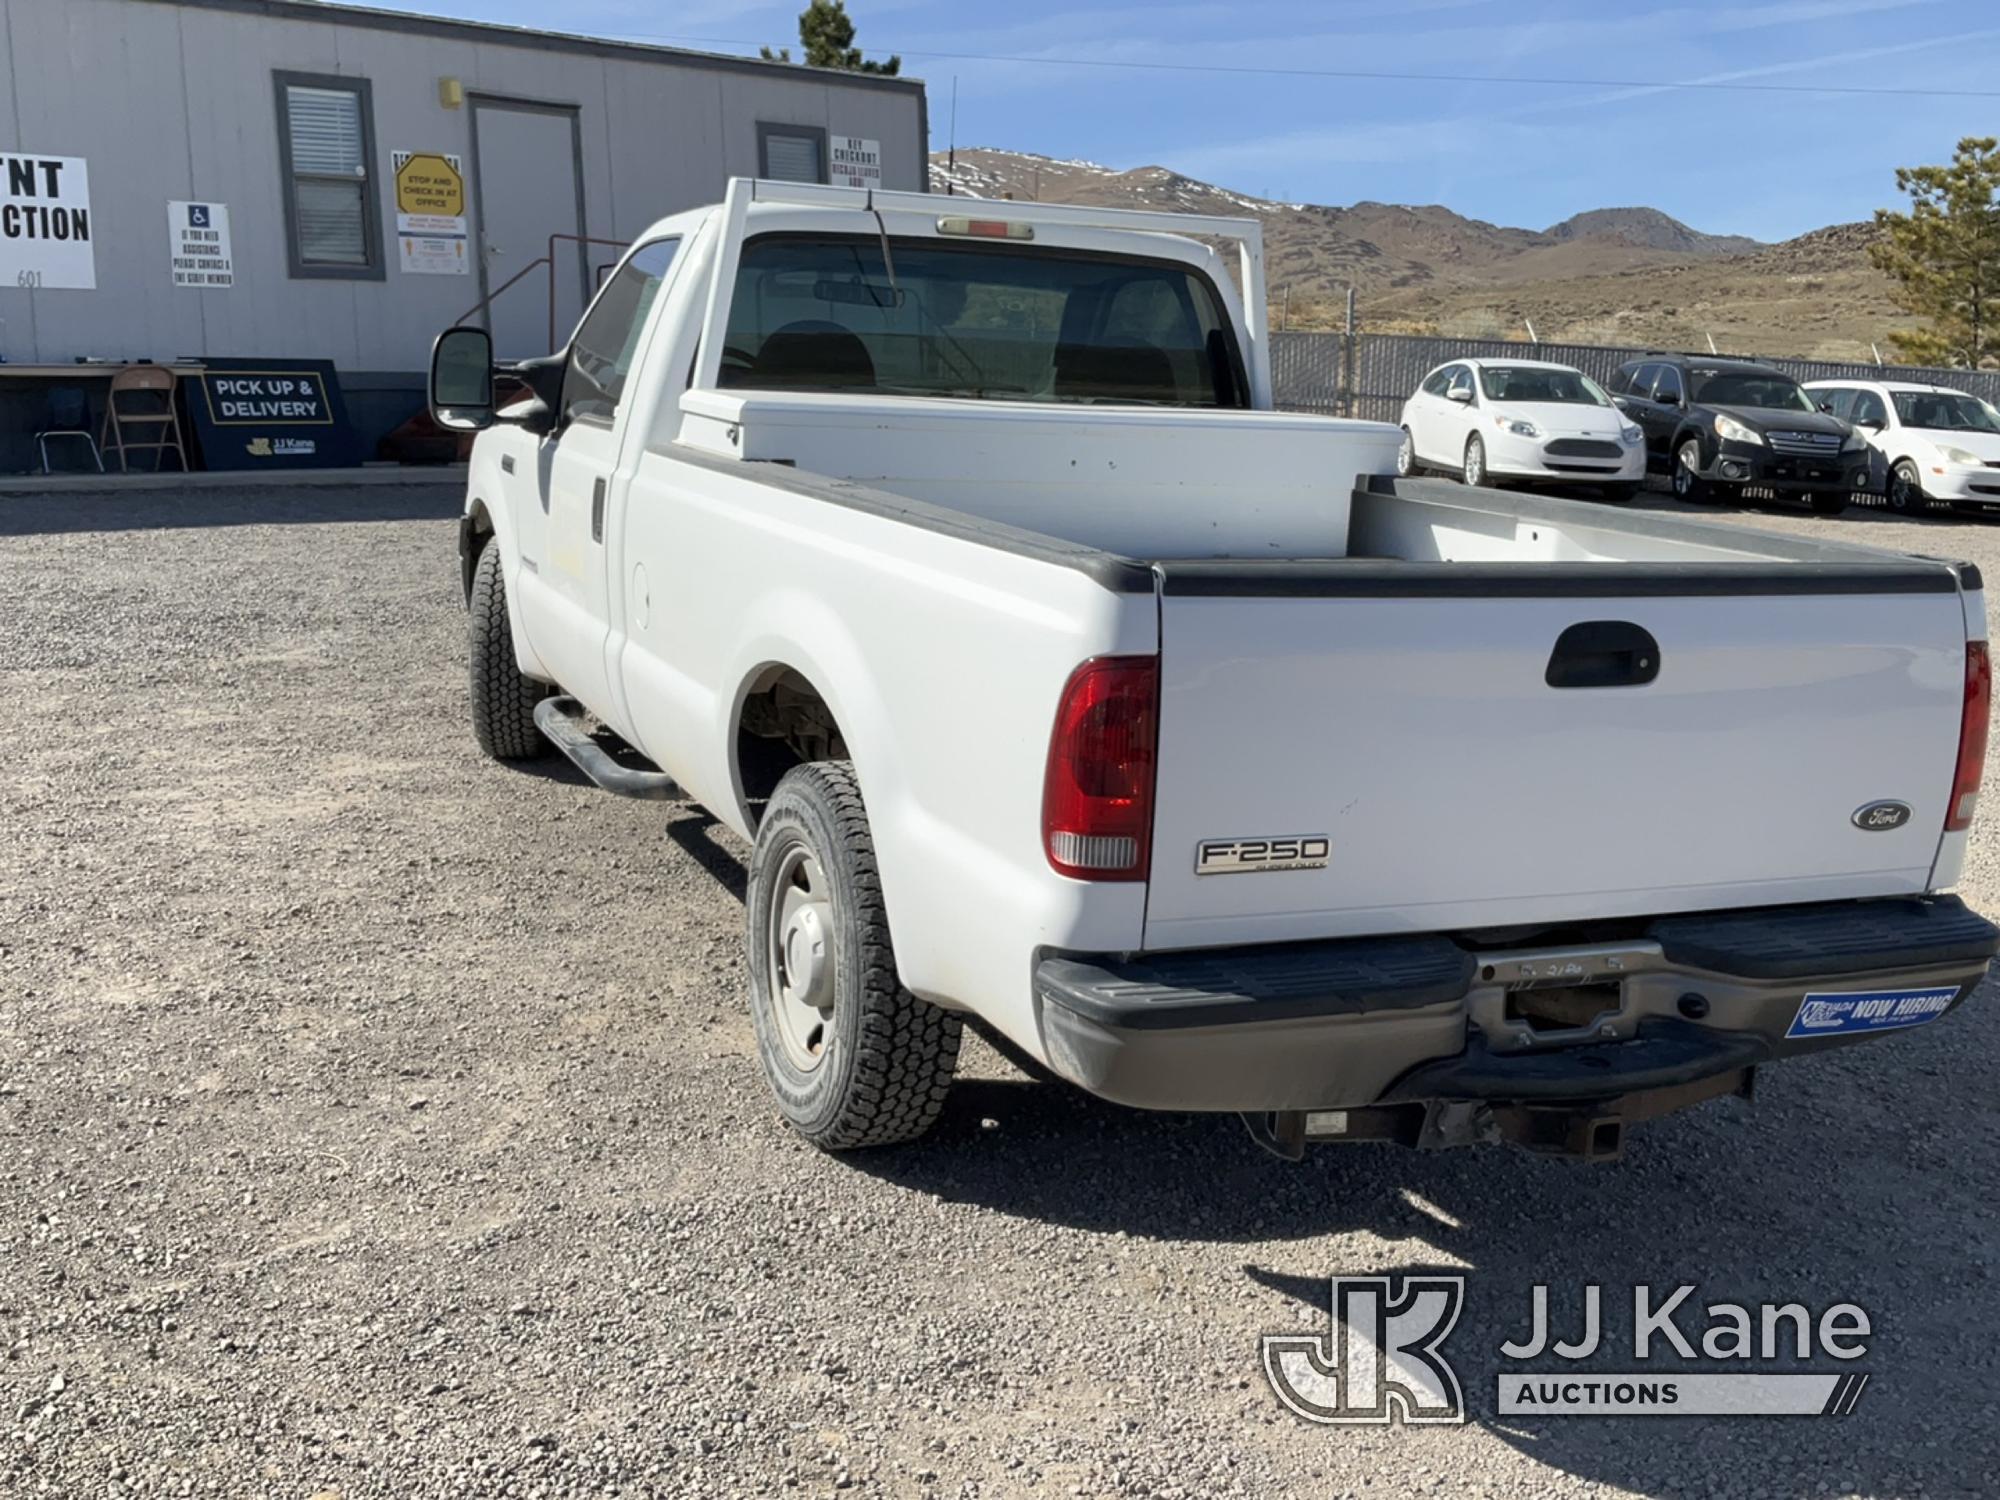 (McCarran, NV) 2007 Ford F-250 Pickup Located In Reno Nv. Contact Nathan Tiedt To Preview 775-240-10